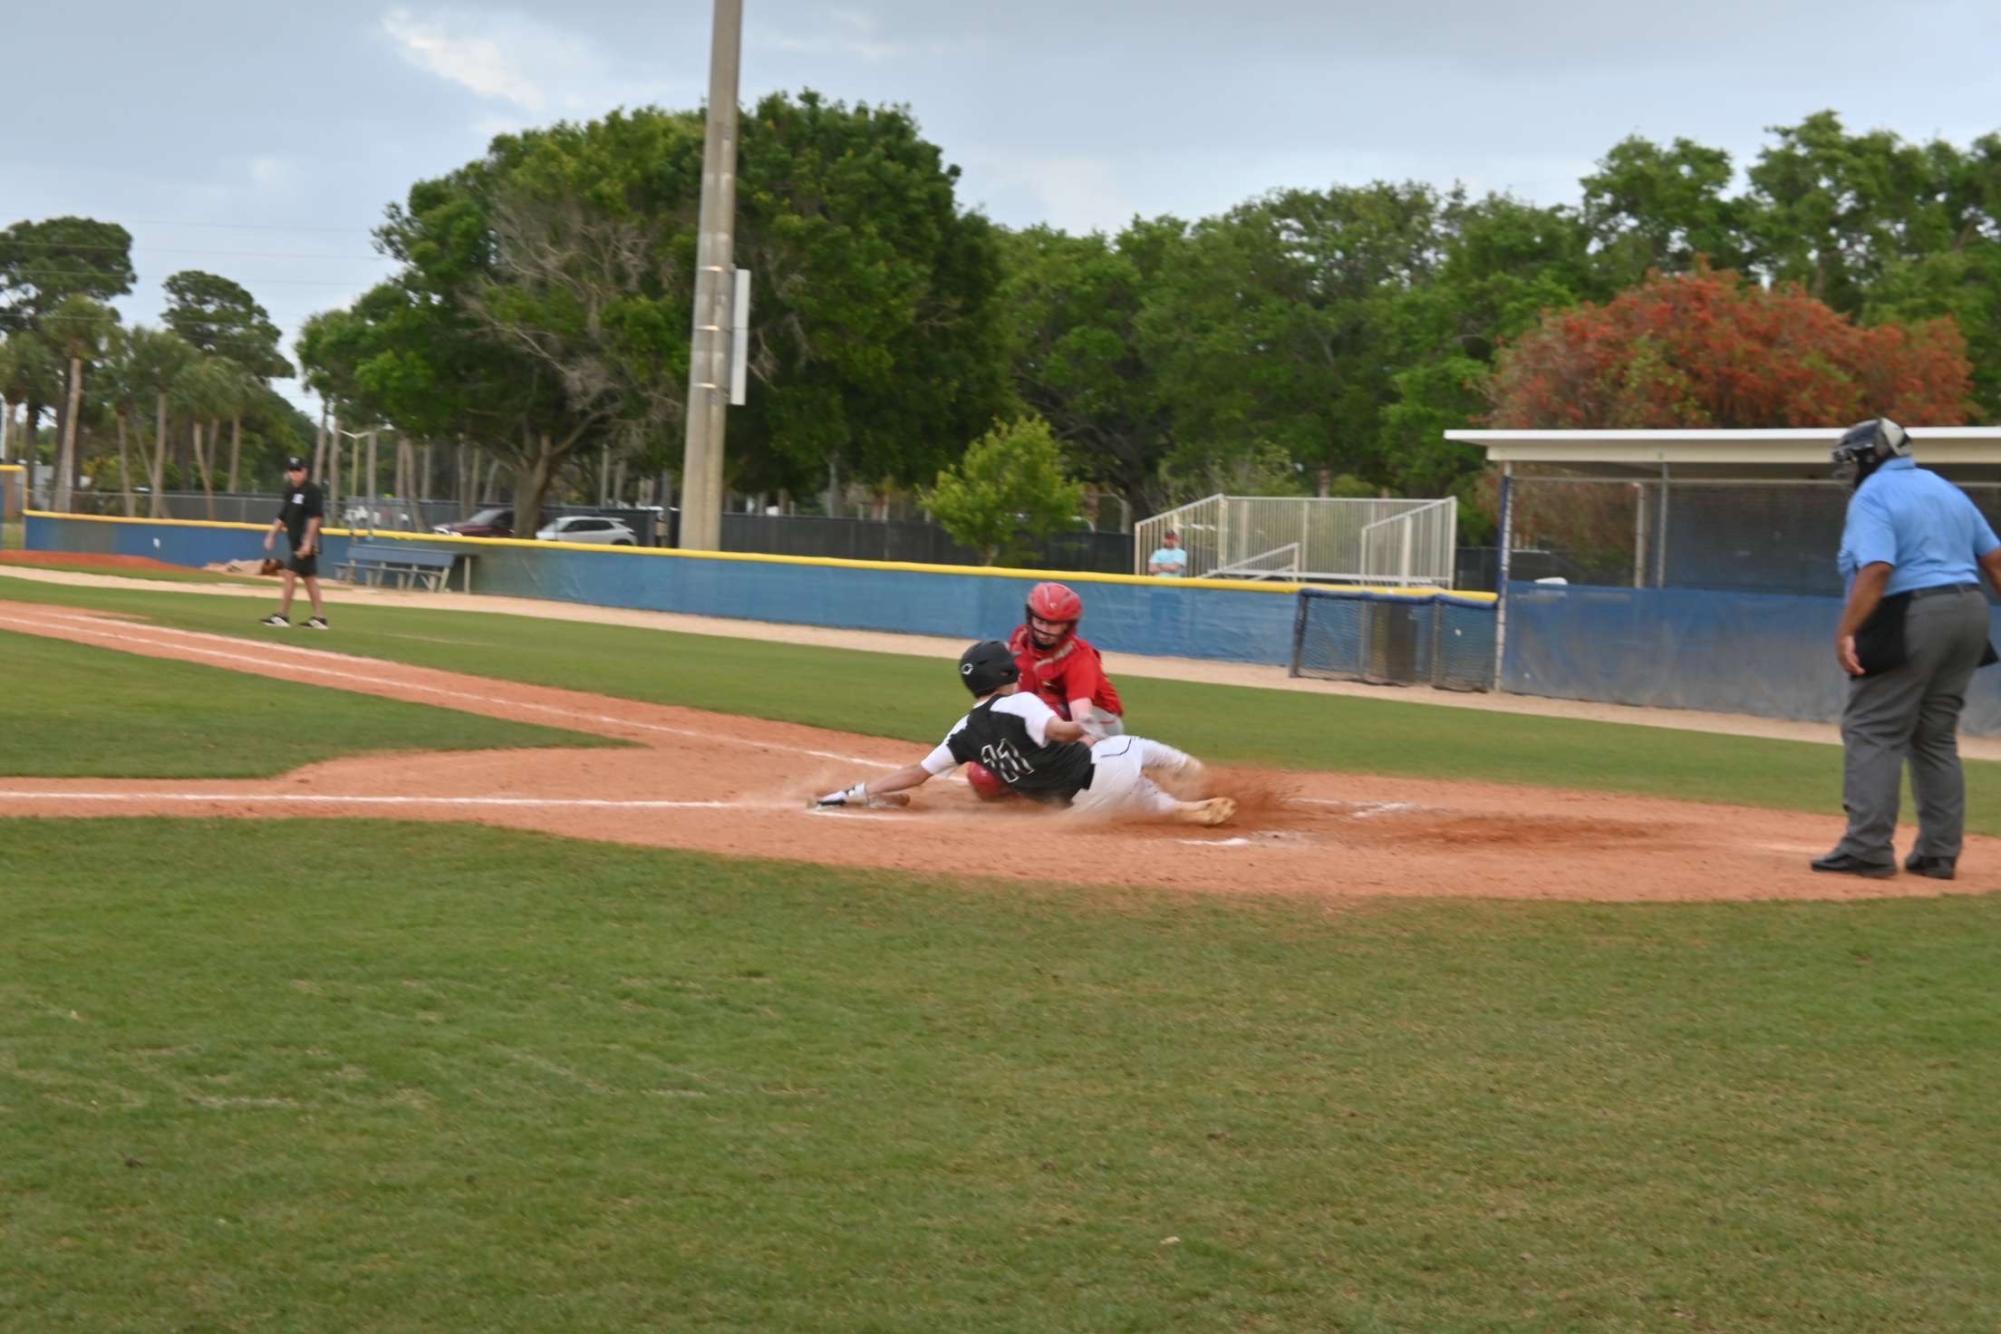 Senior baseball captain Adam Gall slides into home plate during one of the teams scrimmages. Adam brings experience and leadership to a team full of young players. Baseball has peaked the interest of many underclassmen and could be poised for a rise in players in the coming years.  